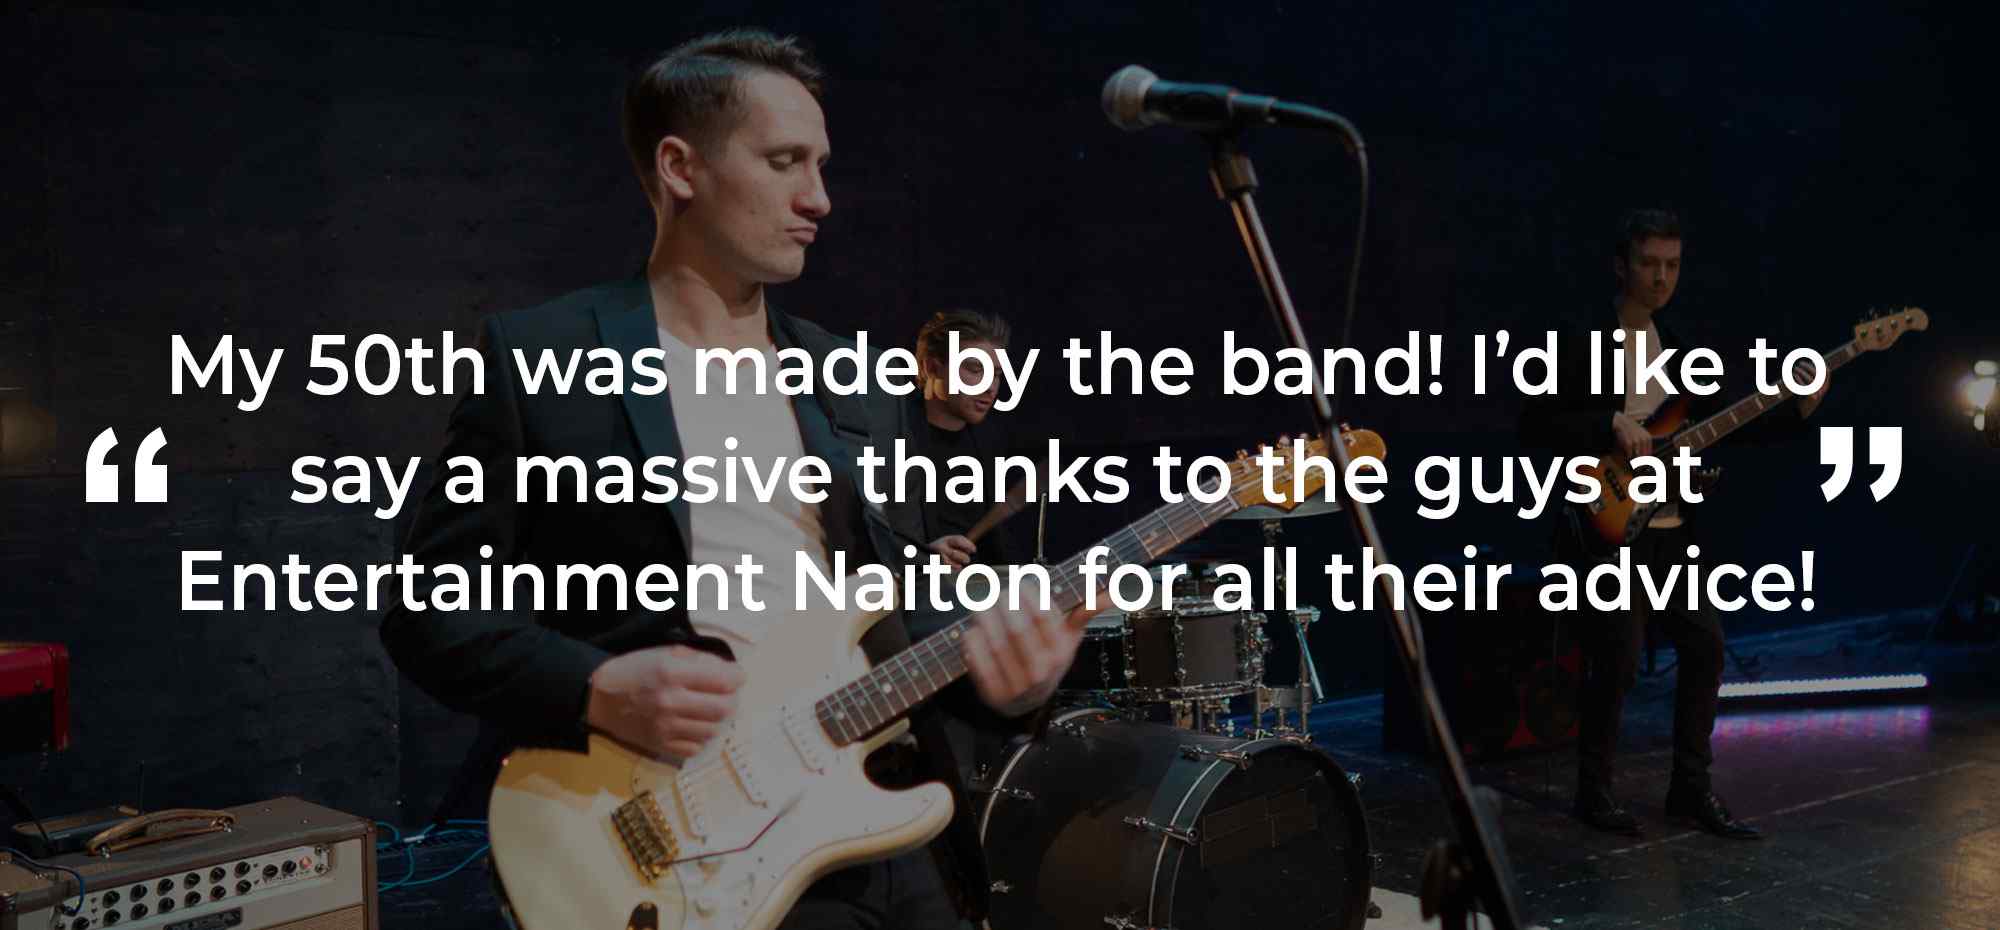 Client Review of a Party Band Powys